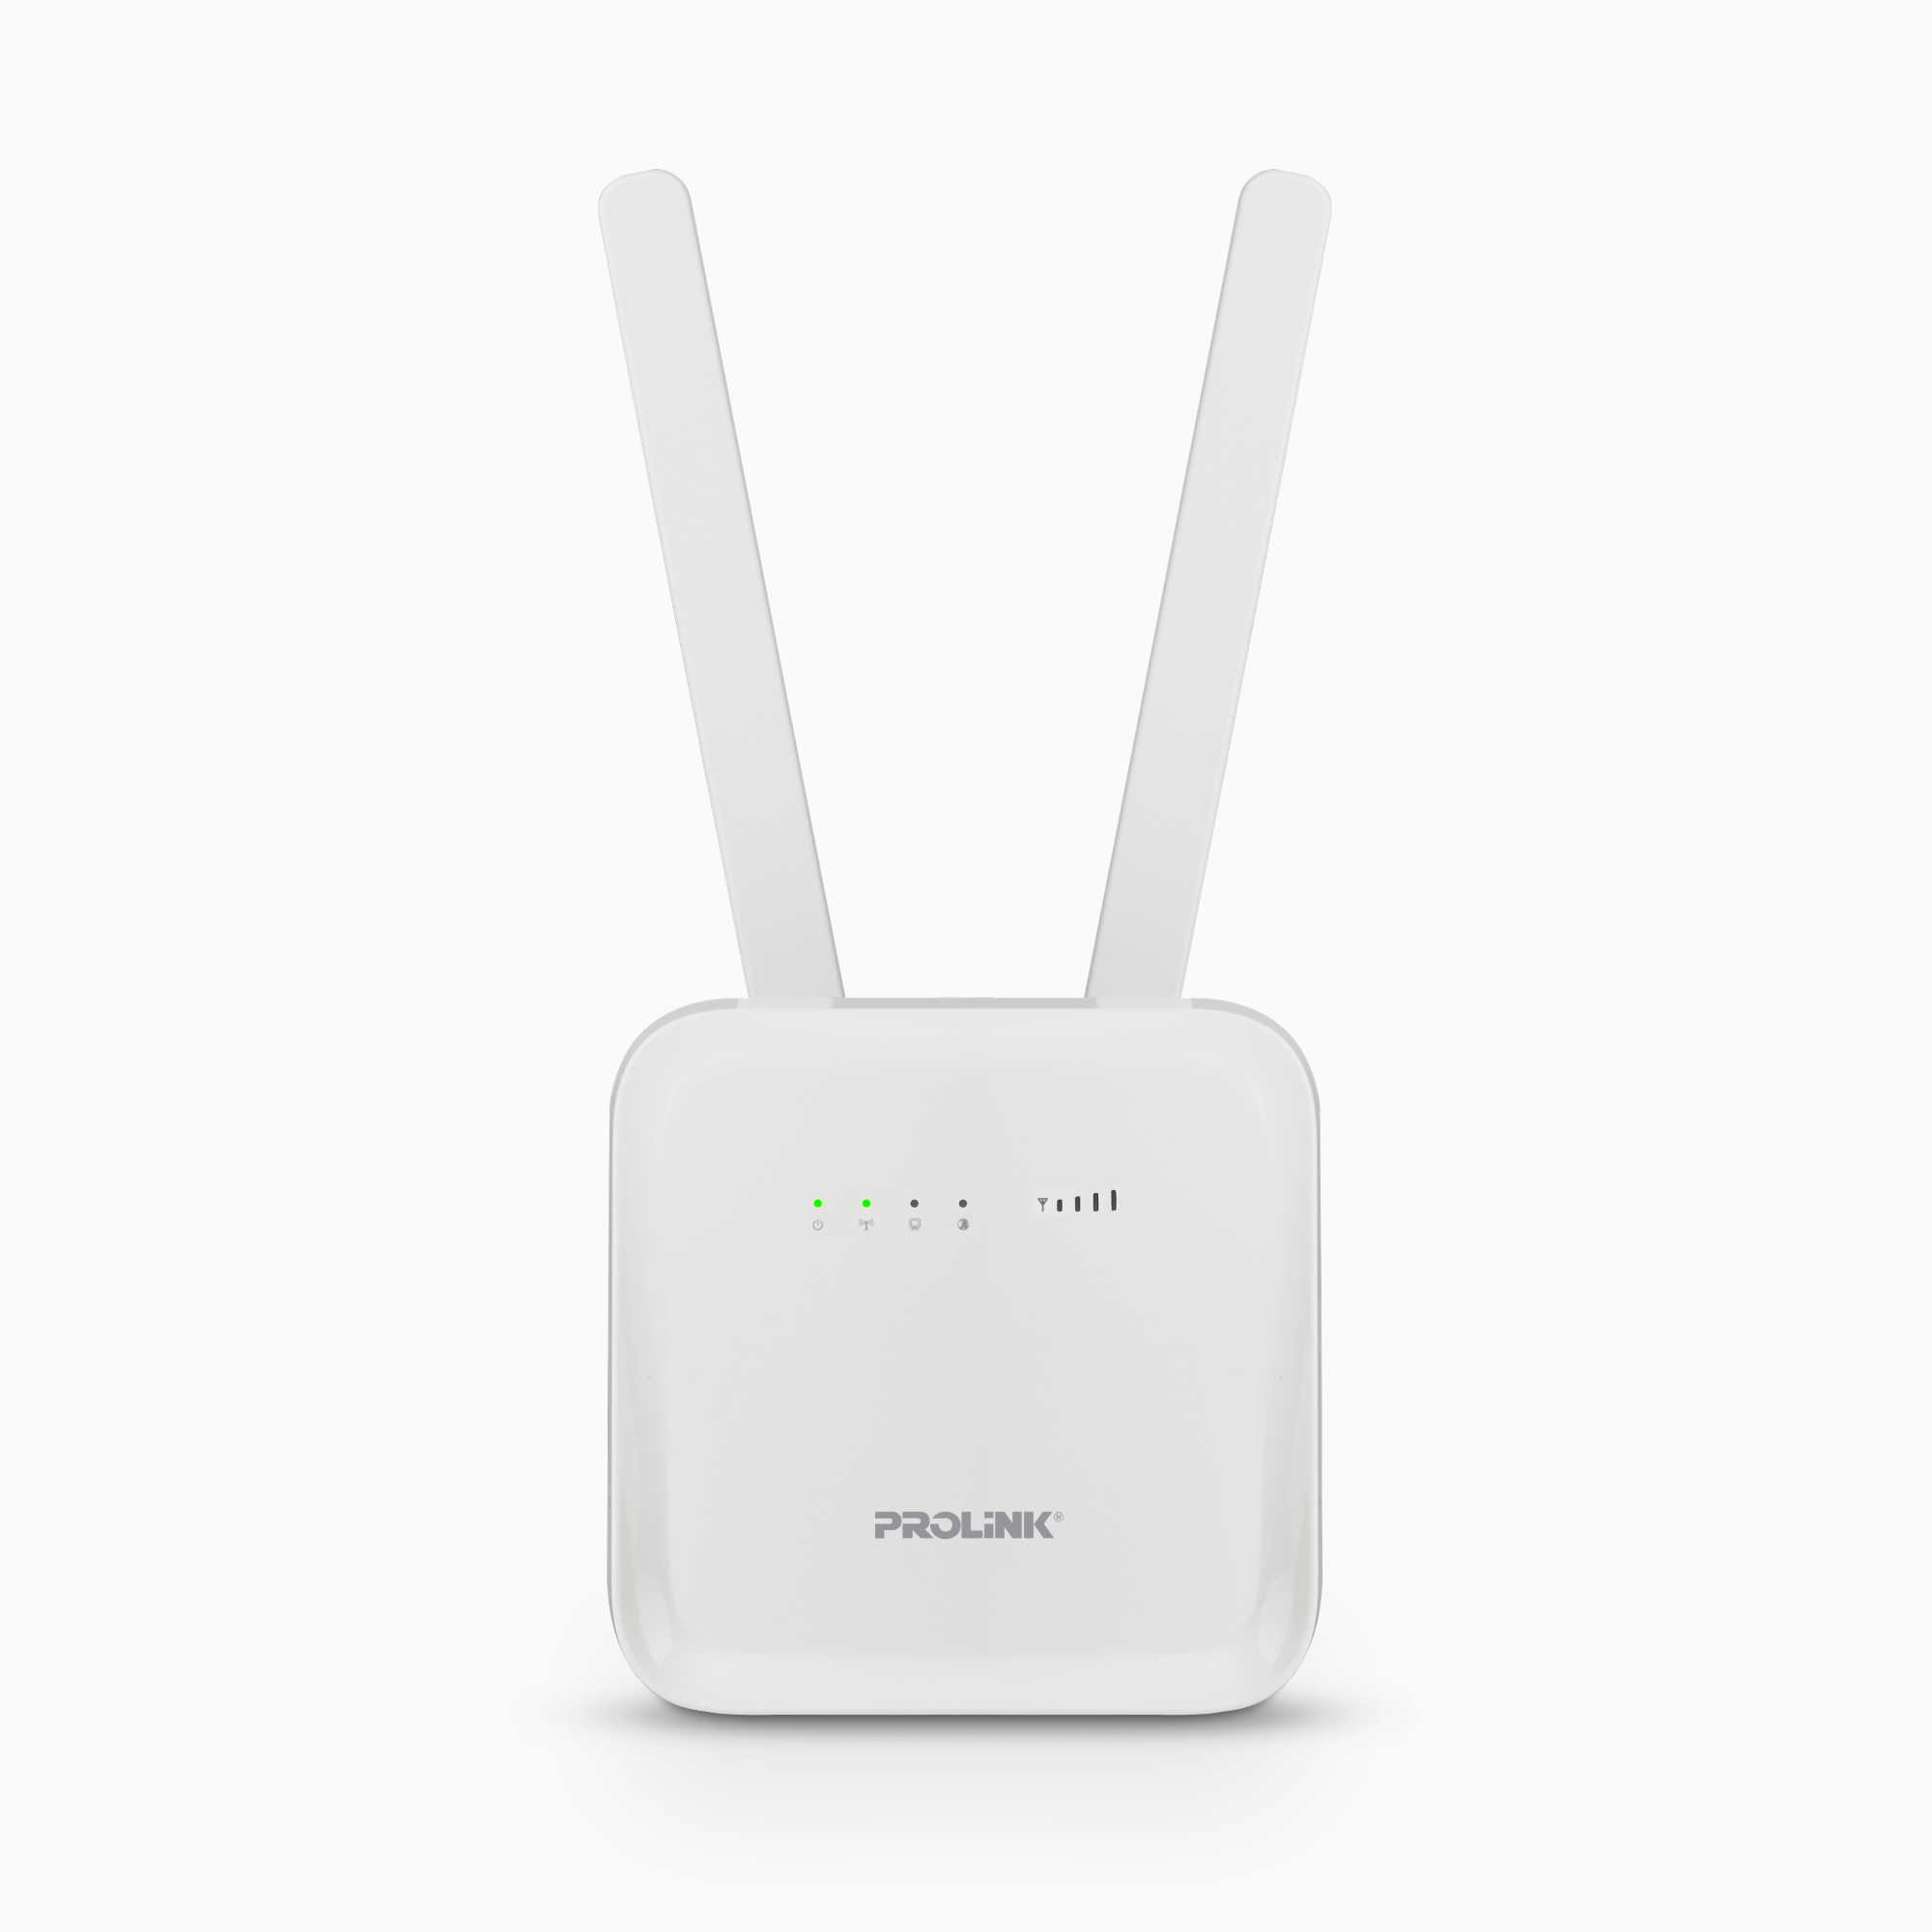 Prolink 4G LTE Unlimited Hotspot WiFi Router with Voice VoLTE/ LAN